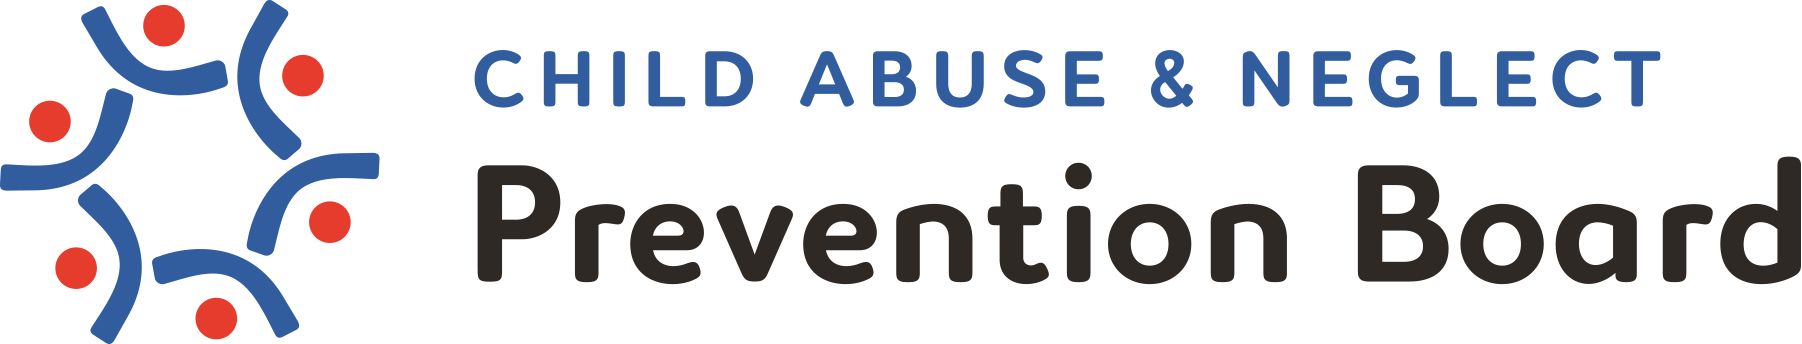 Child Abuse & Neglect Prevention Board - Milwaukee, WI - The Parenting Network